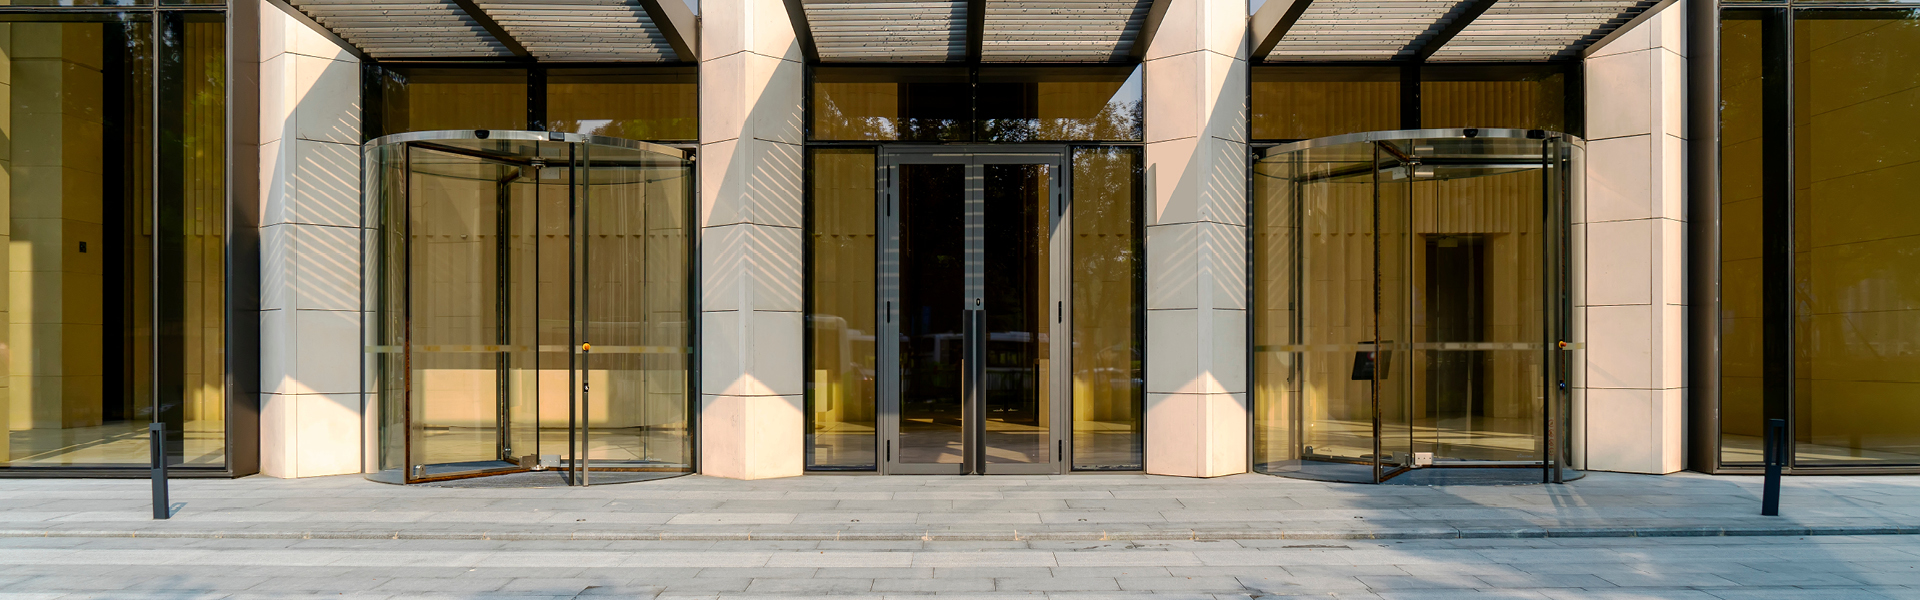 Entrance to an office building with three doors